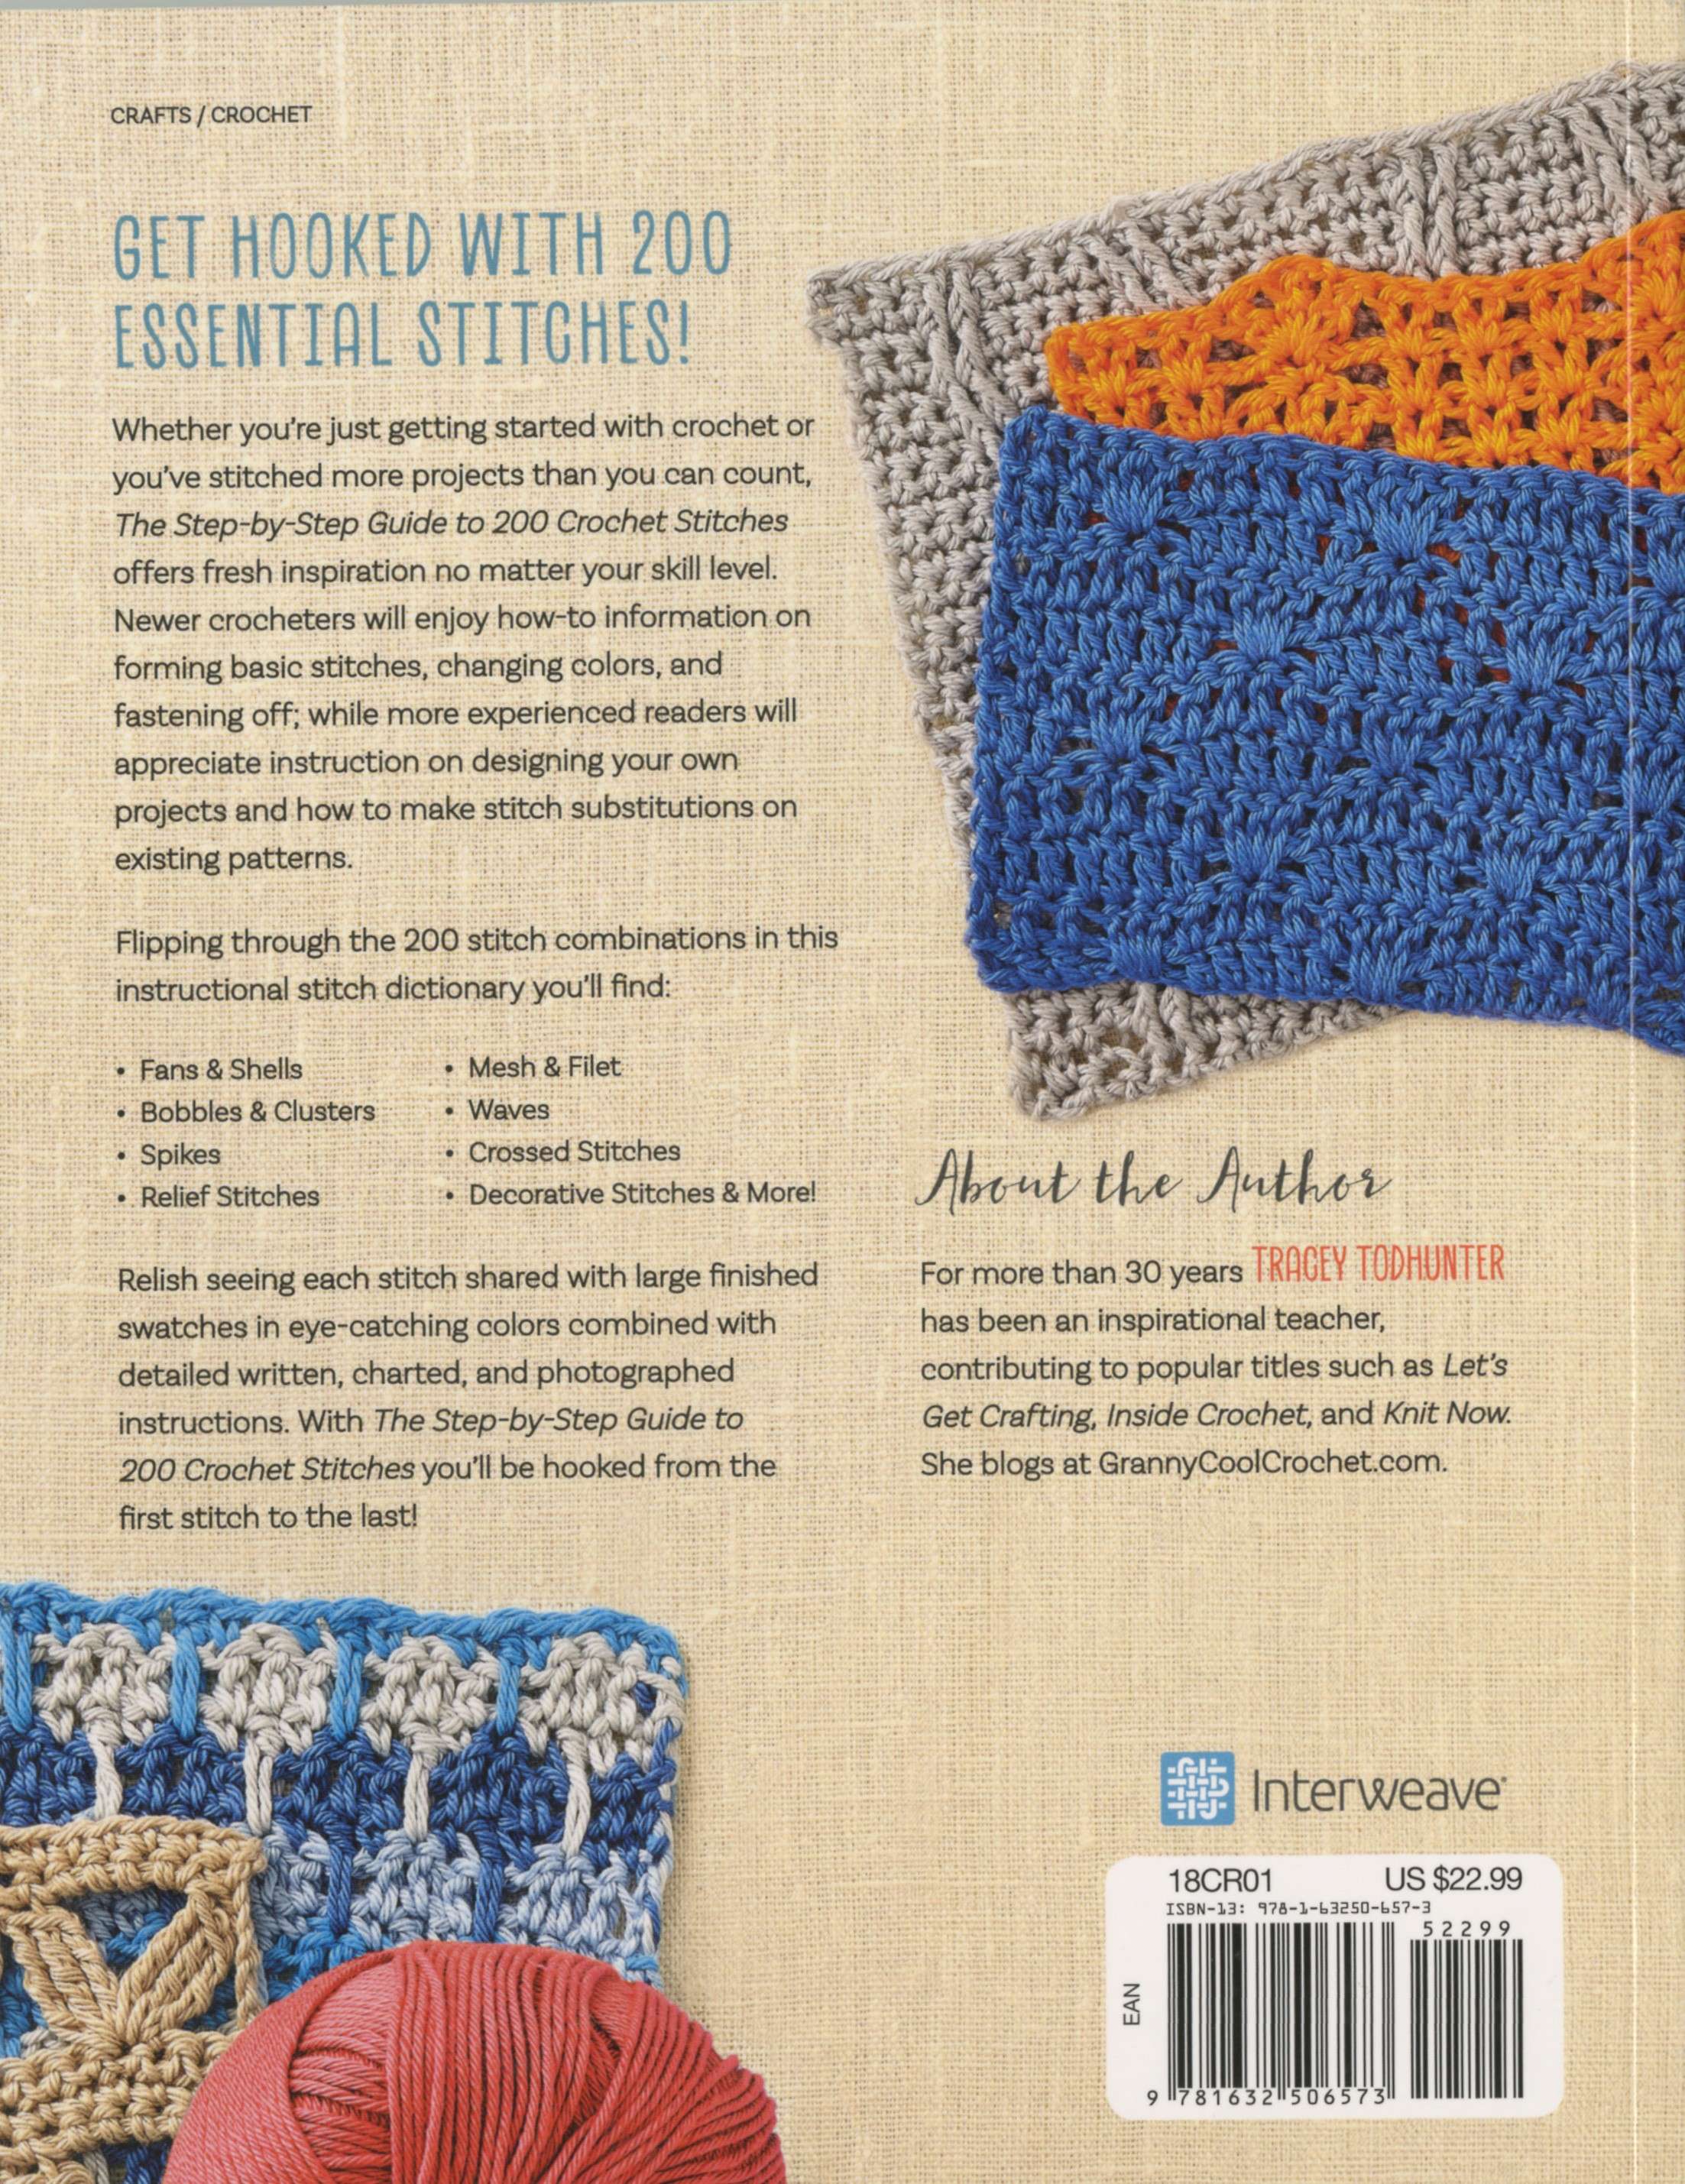 20 Crochet Stitch Dictionaries for Beginners and Beyond - Crafting Each Day